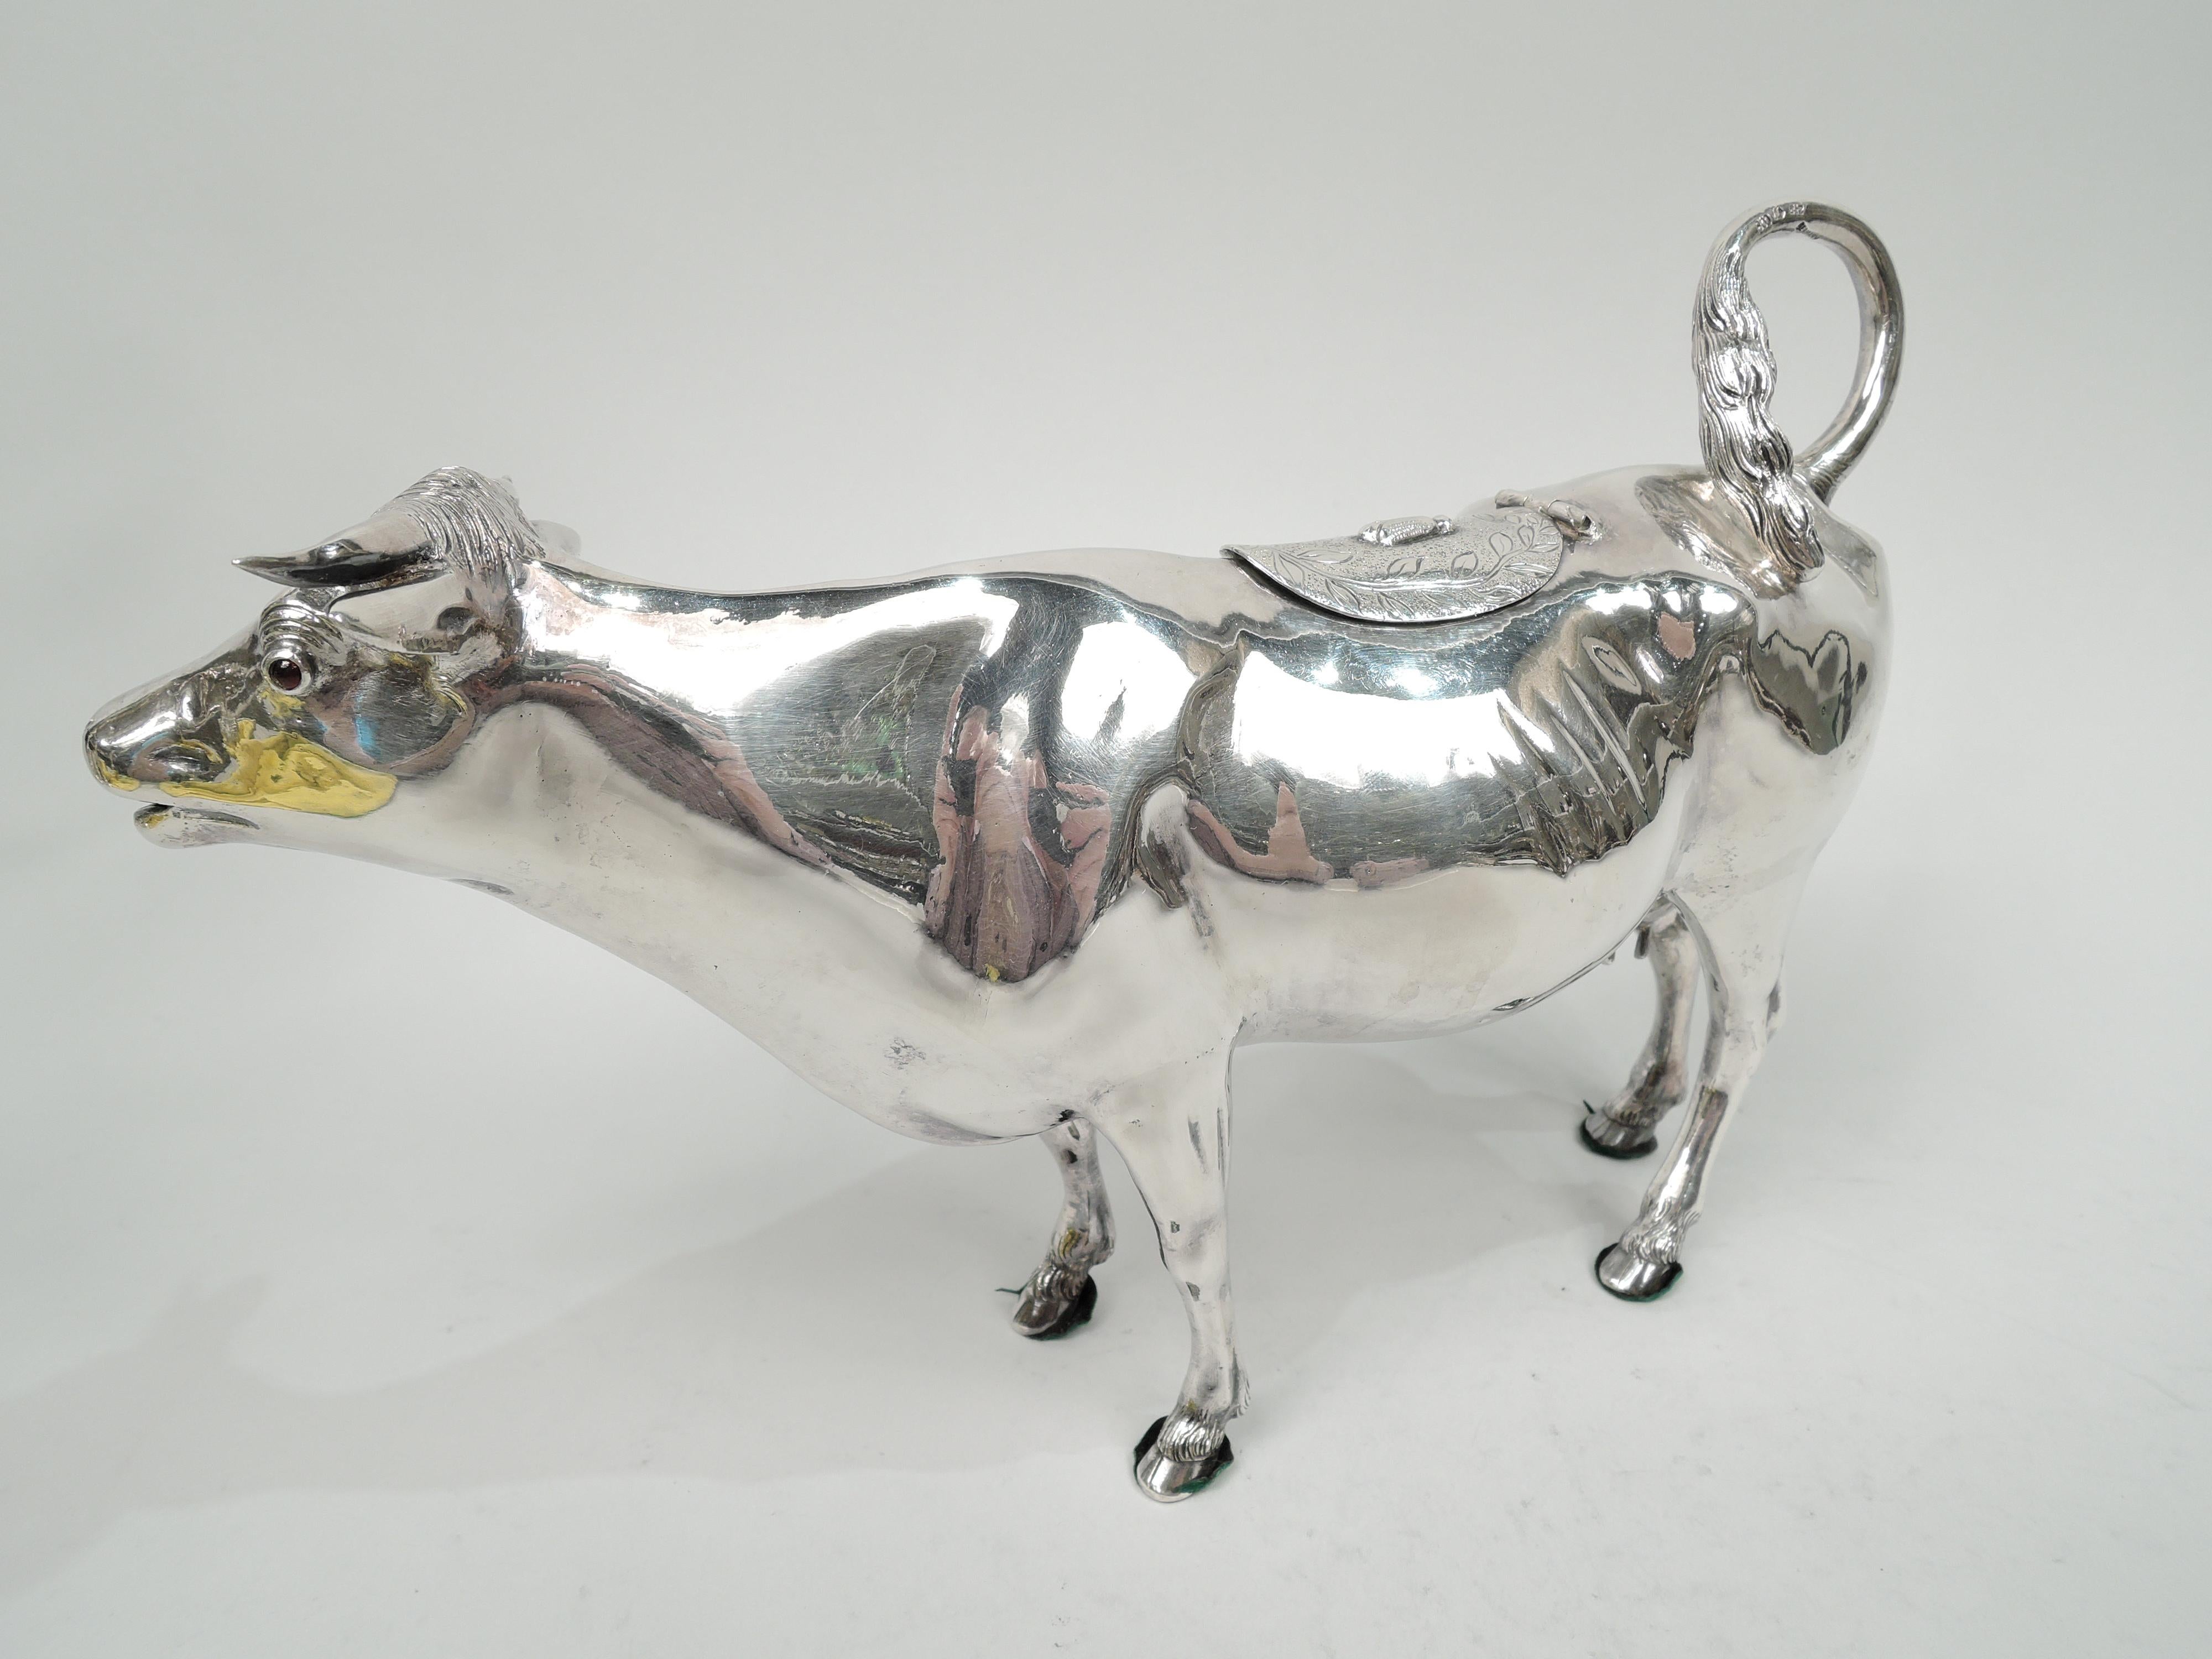 German 800 silver cow creamer, ca 1910. Stocky body with flexed ears, flicked-back tail handle, and hinged and stippled back flap with engraved wreath and applied fly finial. A gentle face with red-glass eyes and gaping-mouth spout. A capacious